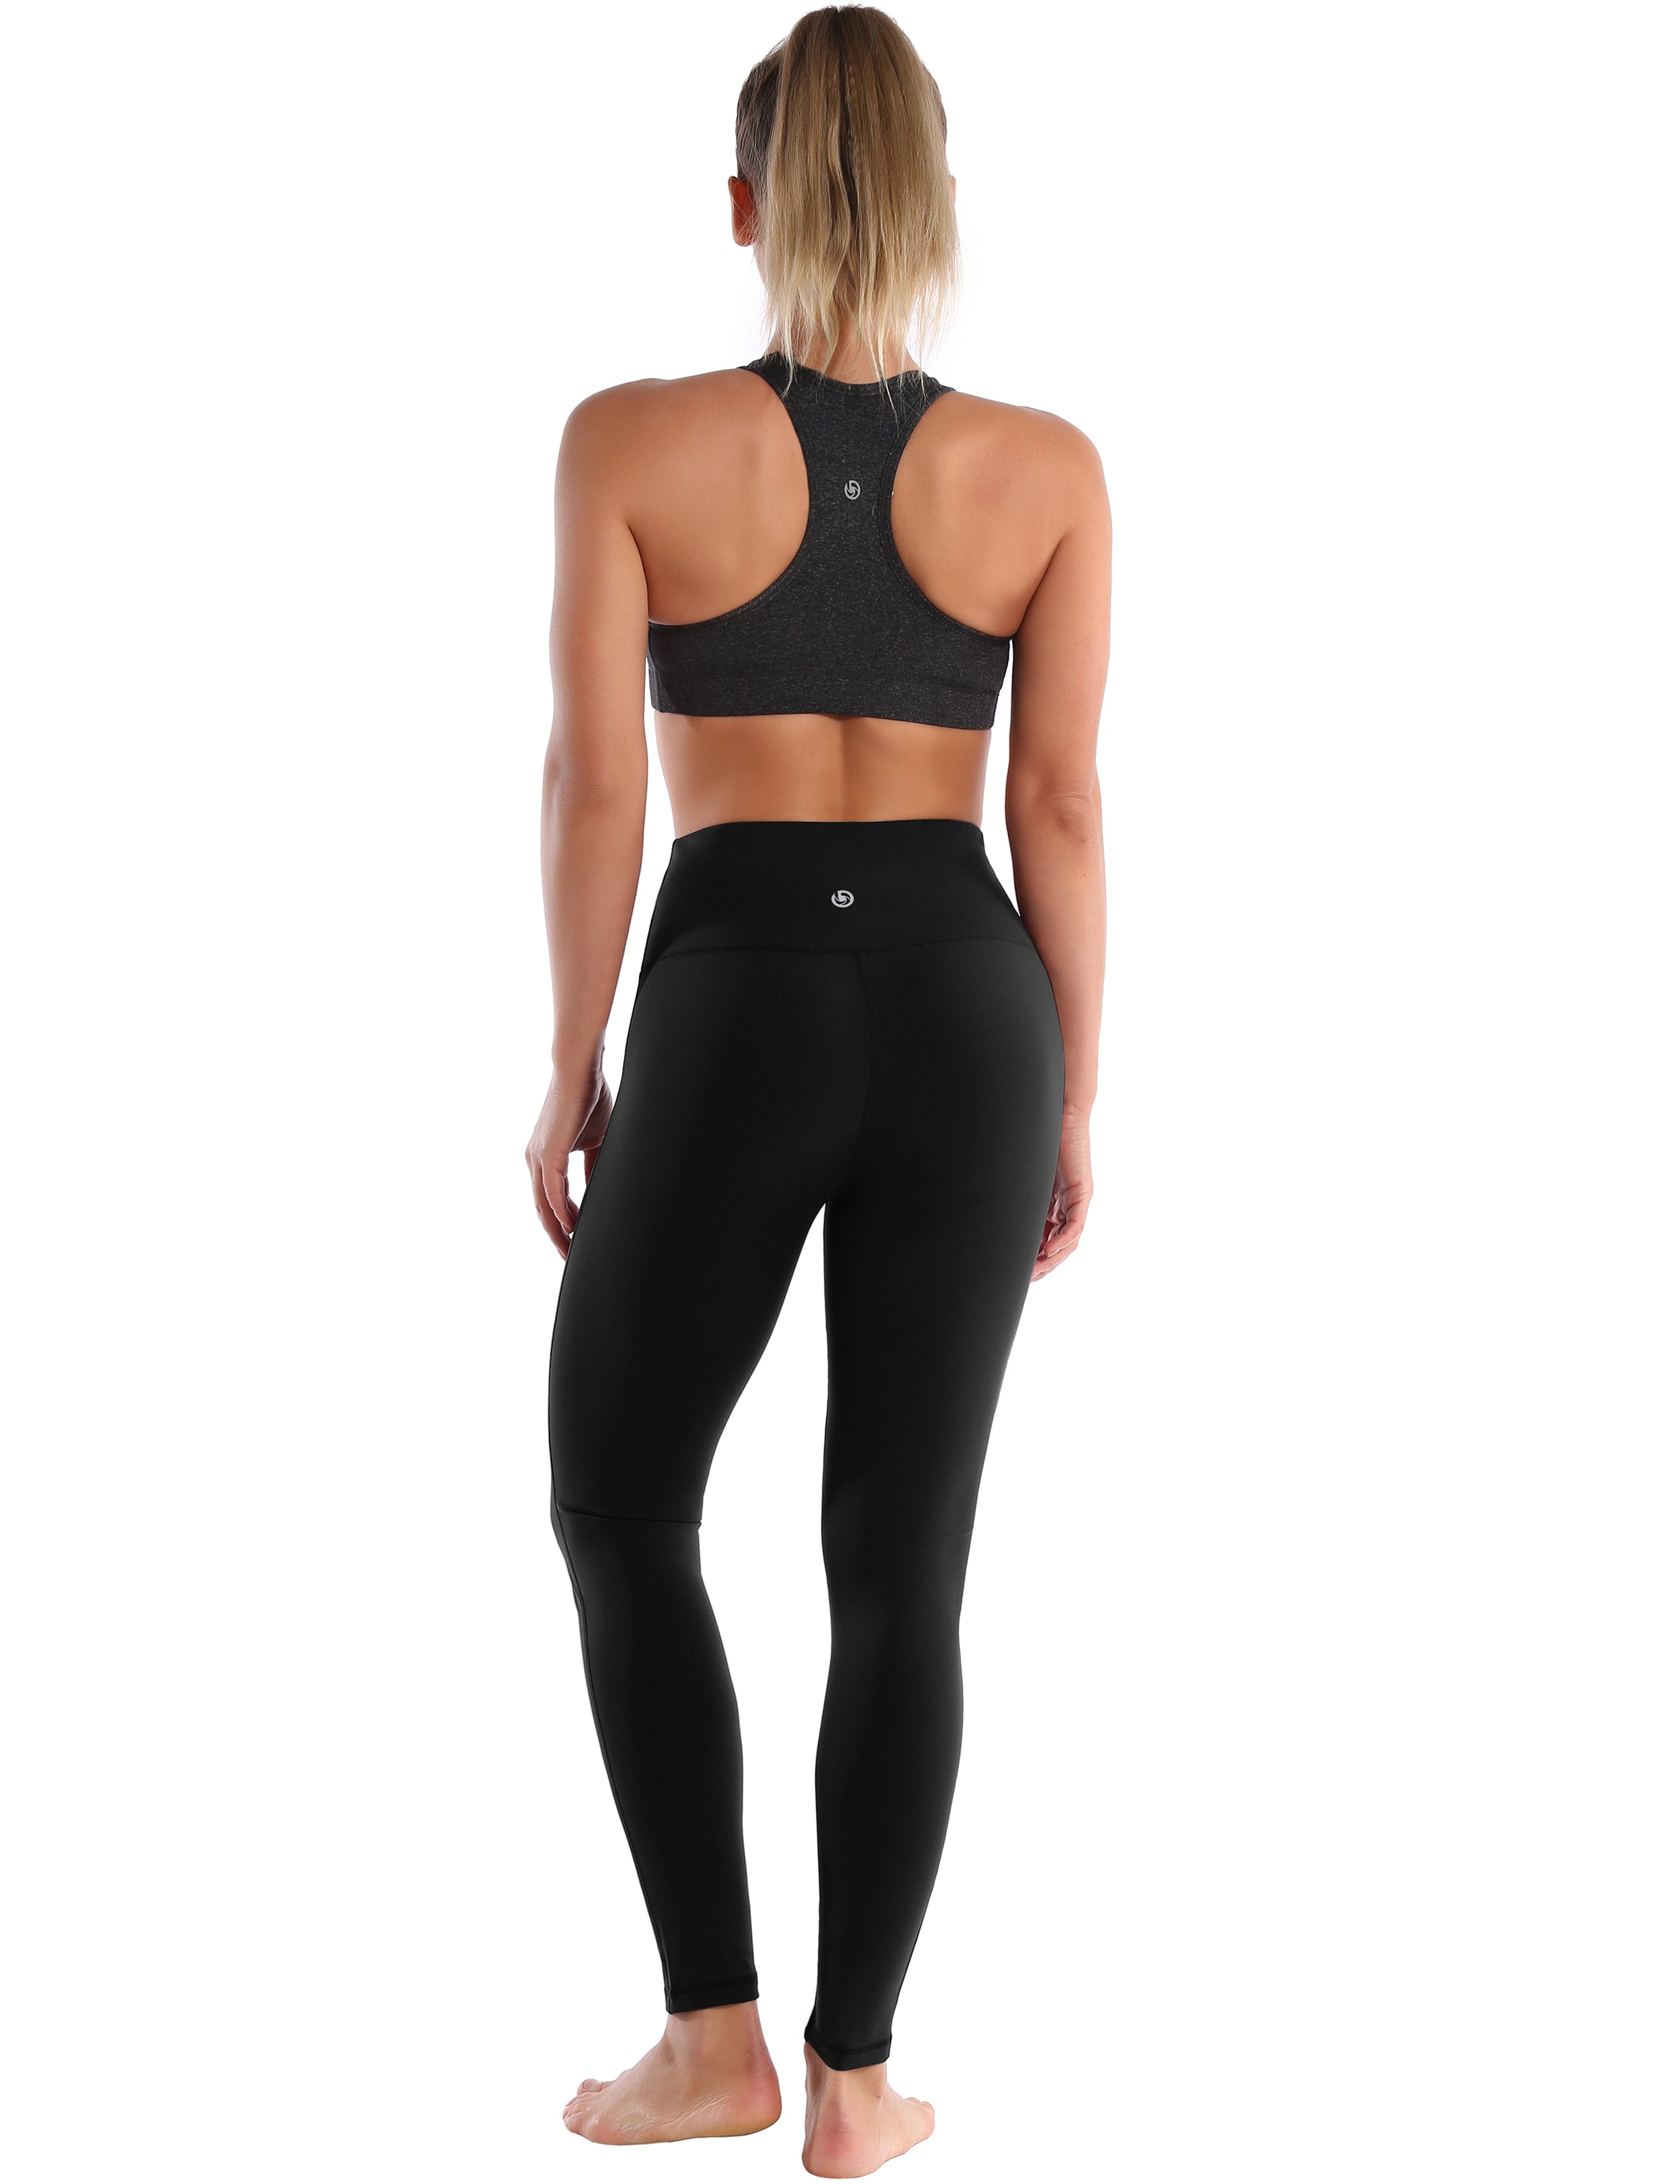 High Waist Side Line Yoga Pants black Side Line is Make Your Legs Look Longer and Thinner 75%Nylon/25%Spandex Fabric doesn't attract lint easily 4-way stretch No see-through Moisture-wicking Tummy control Inner pocket Two lengths